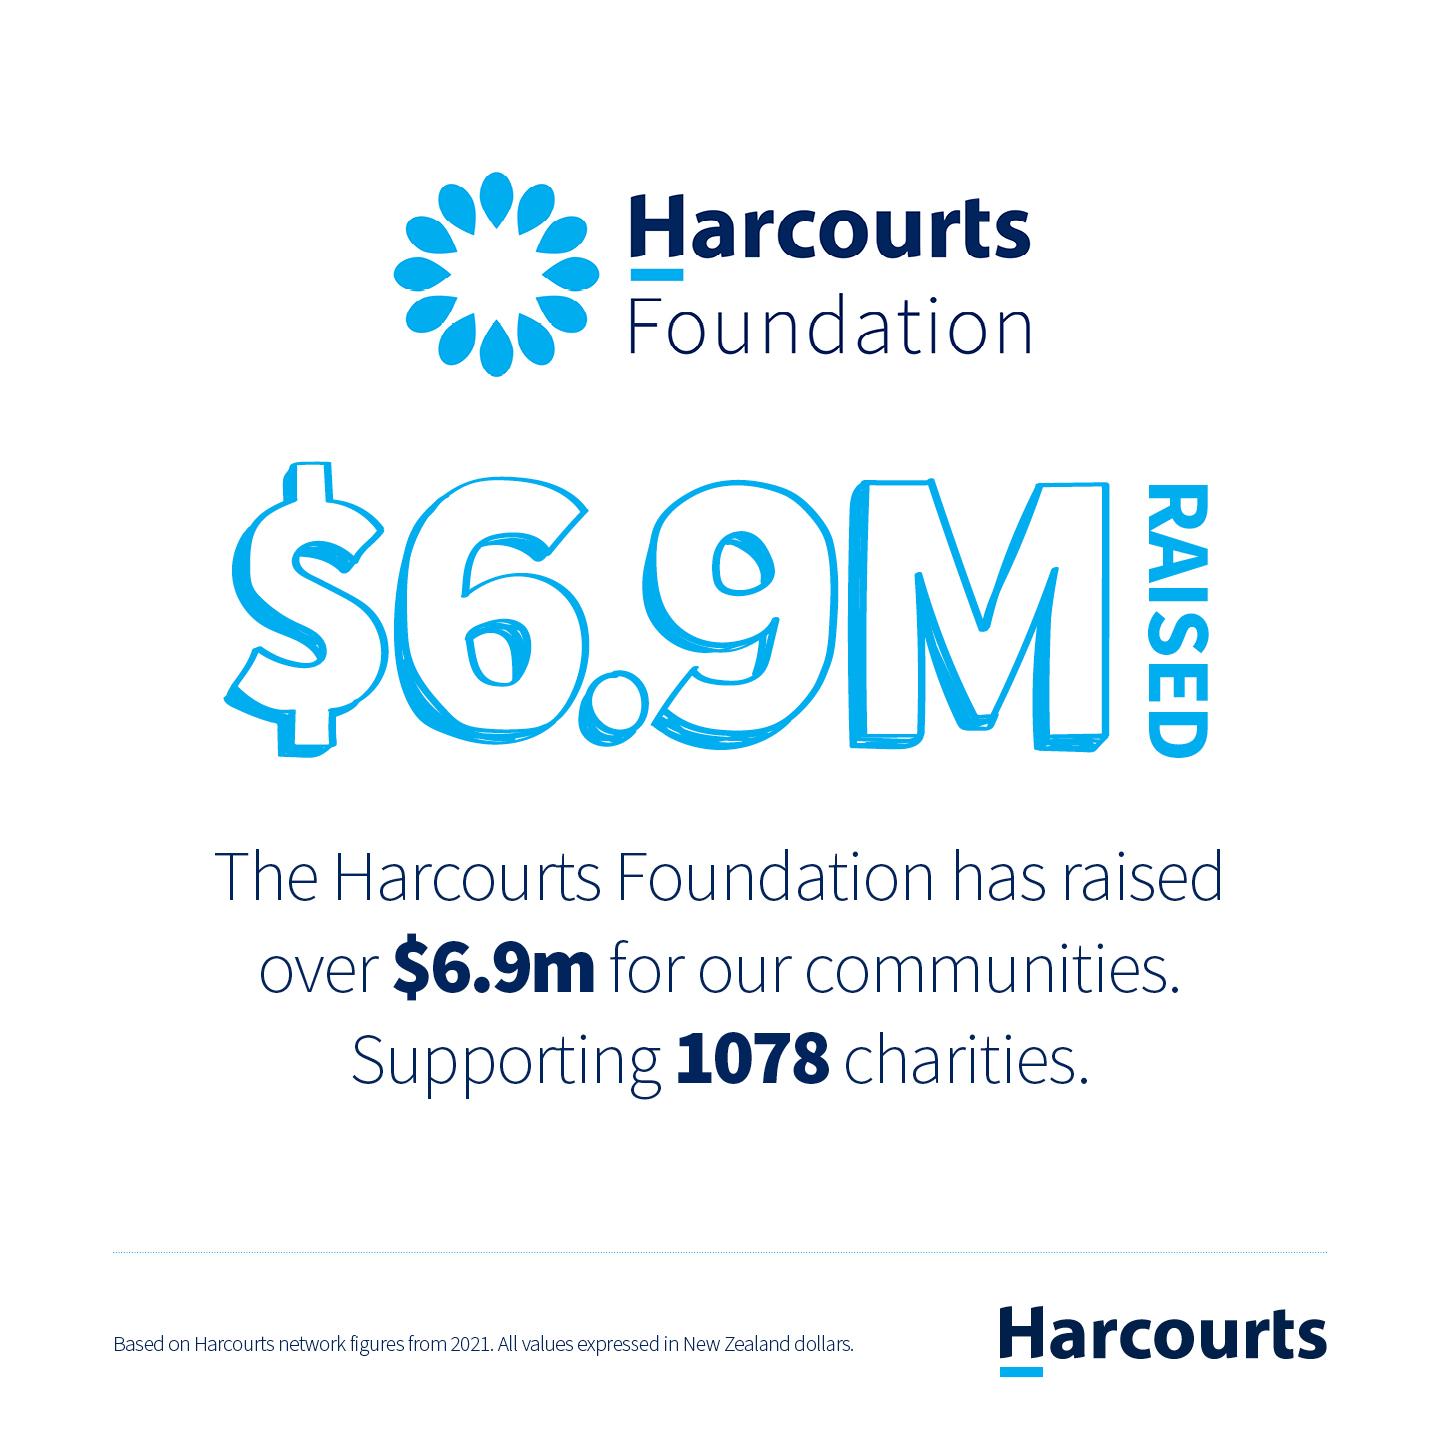 Fact: The Harcourts Foundation has raised over $6.9M for our communities. Supporting 1,078 charities.